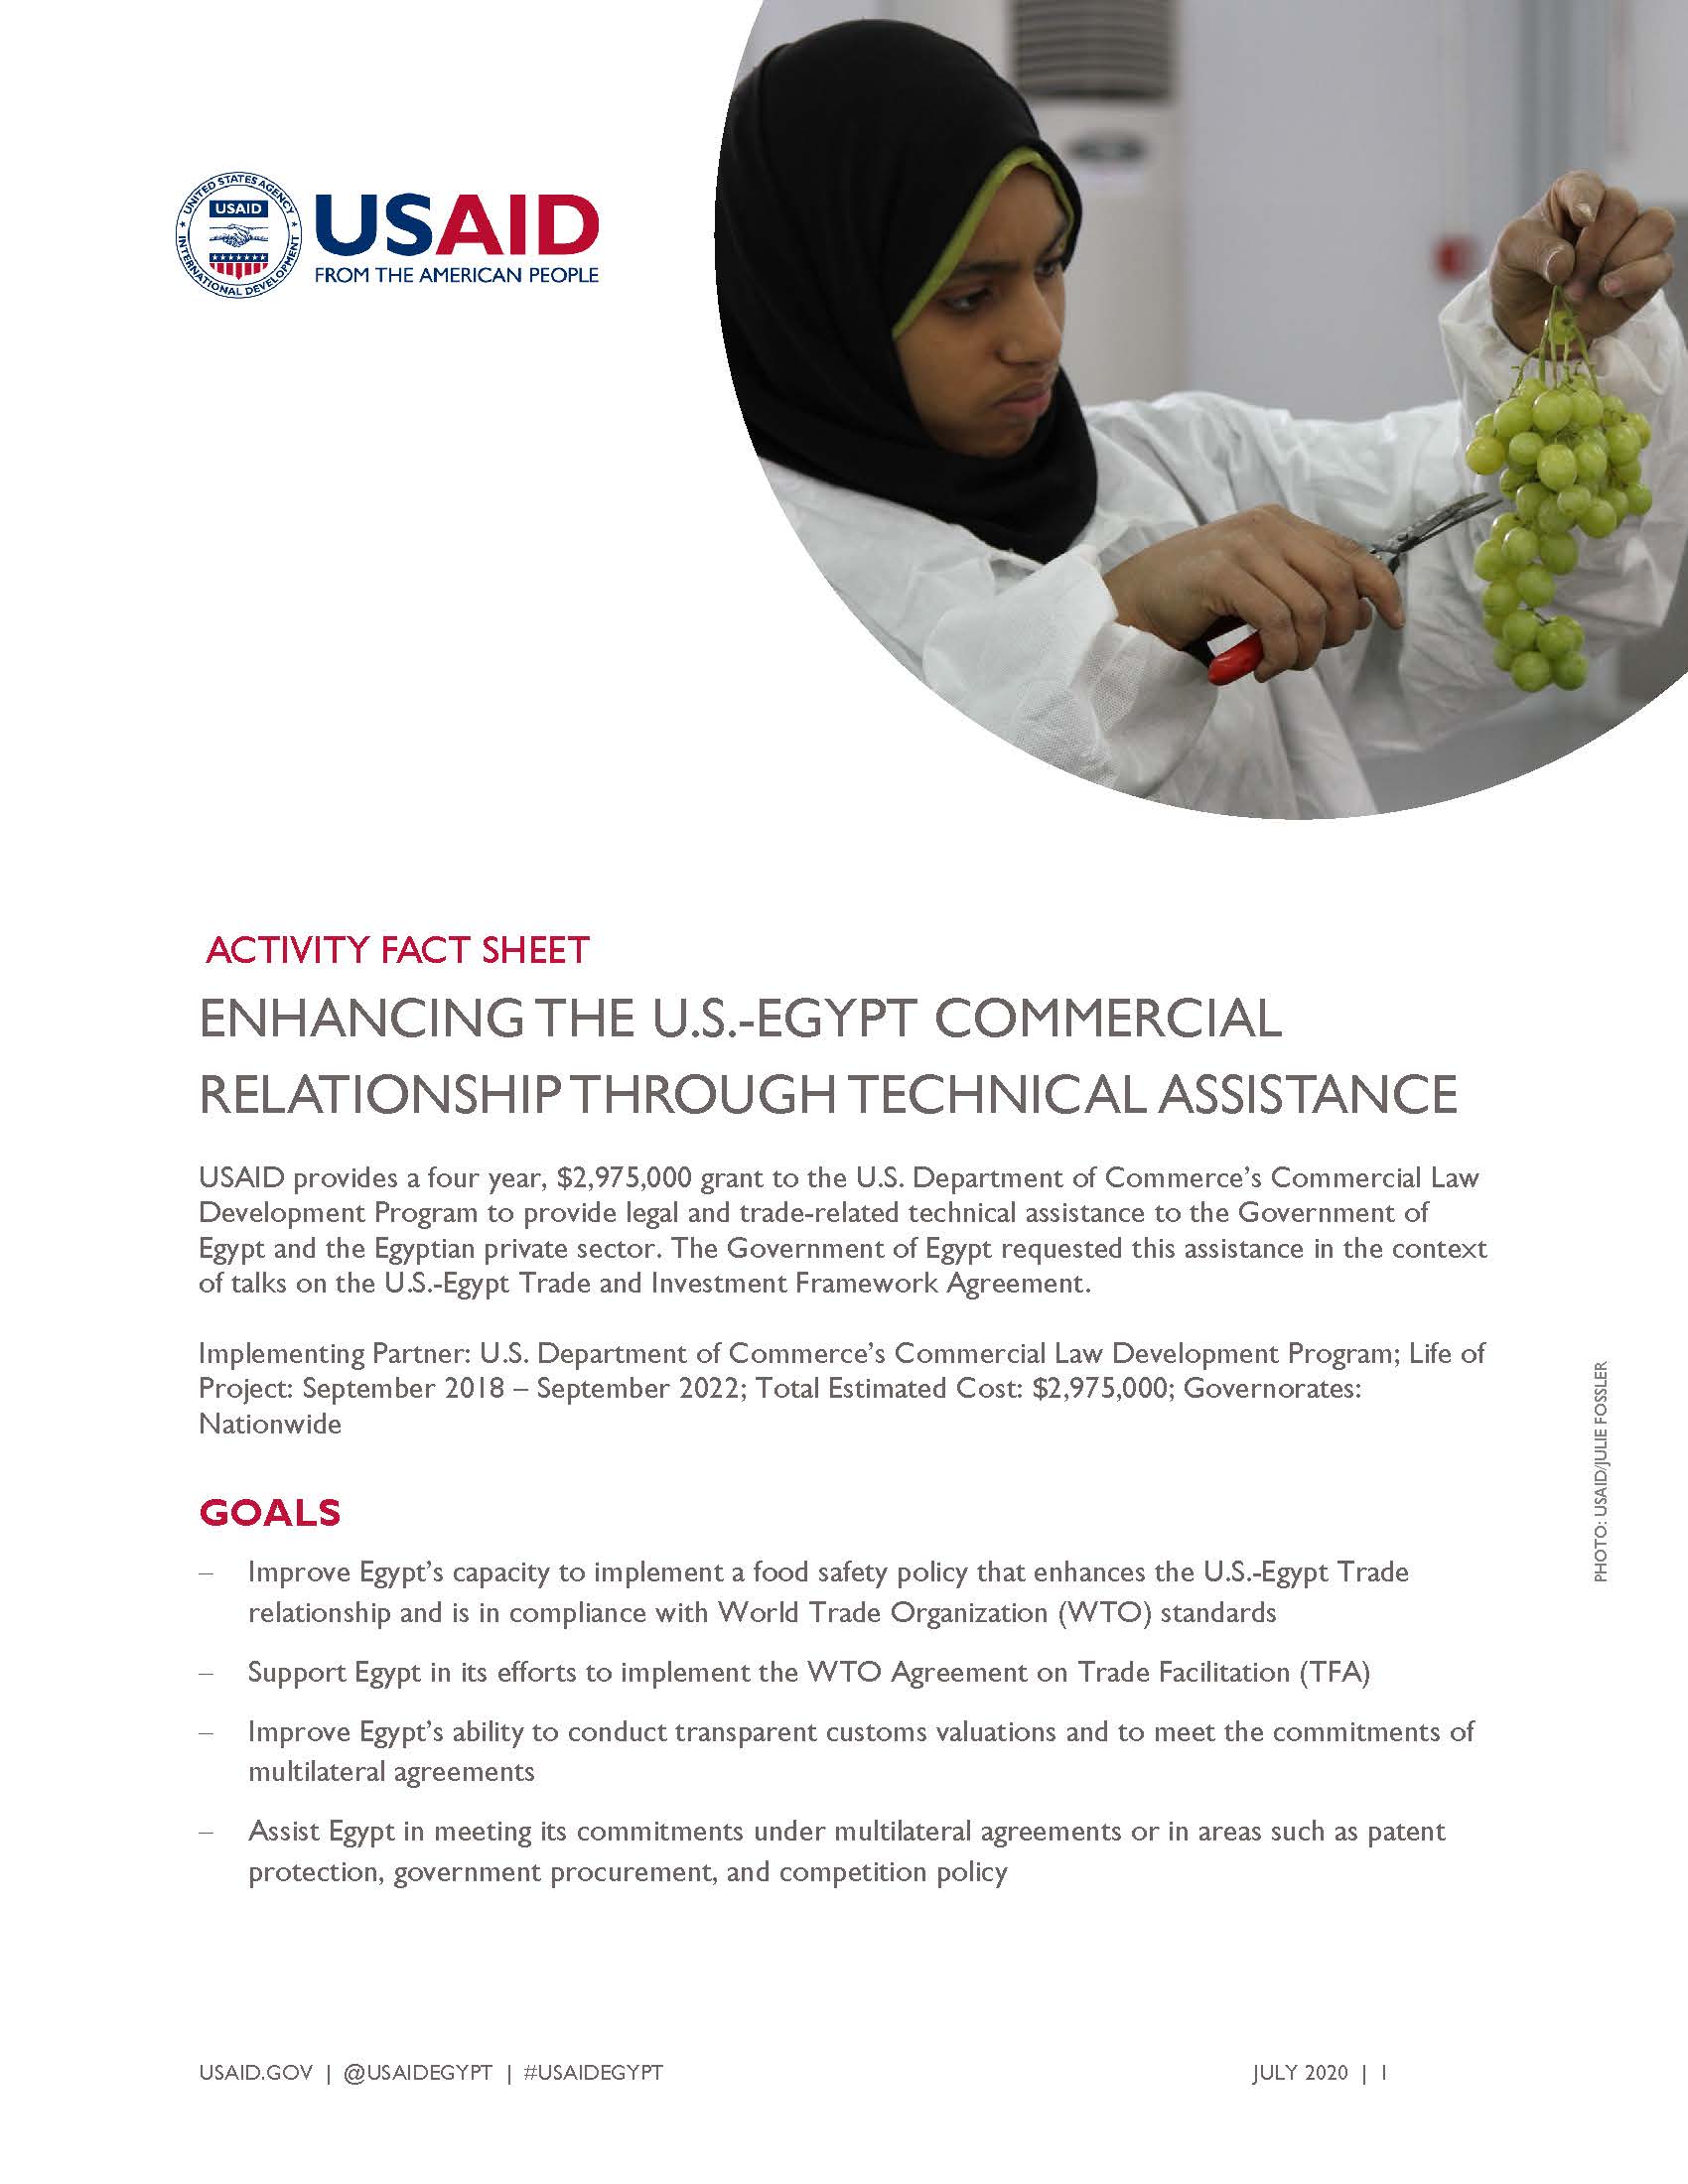 USAID/Egypt Activity Fact Sheet: Enhancing the U.S.-Egypt Commercial Relationship through Technical Assistance